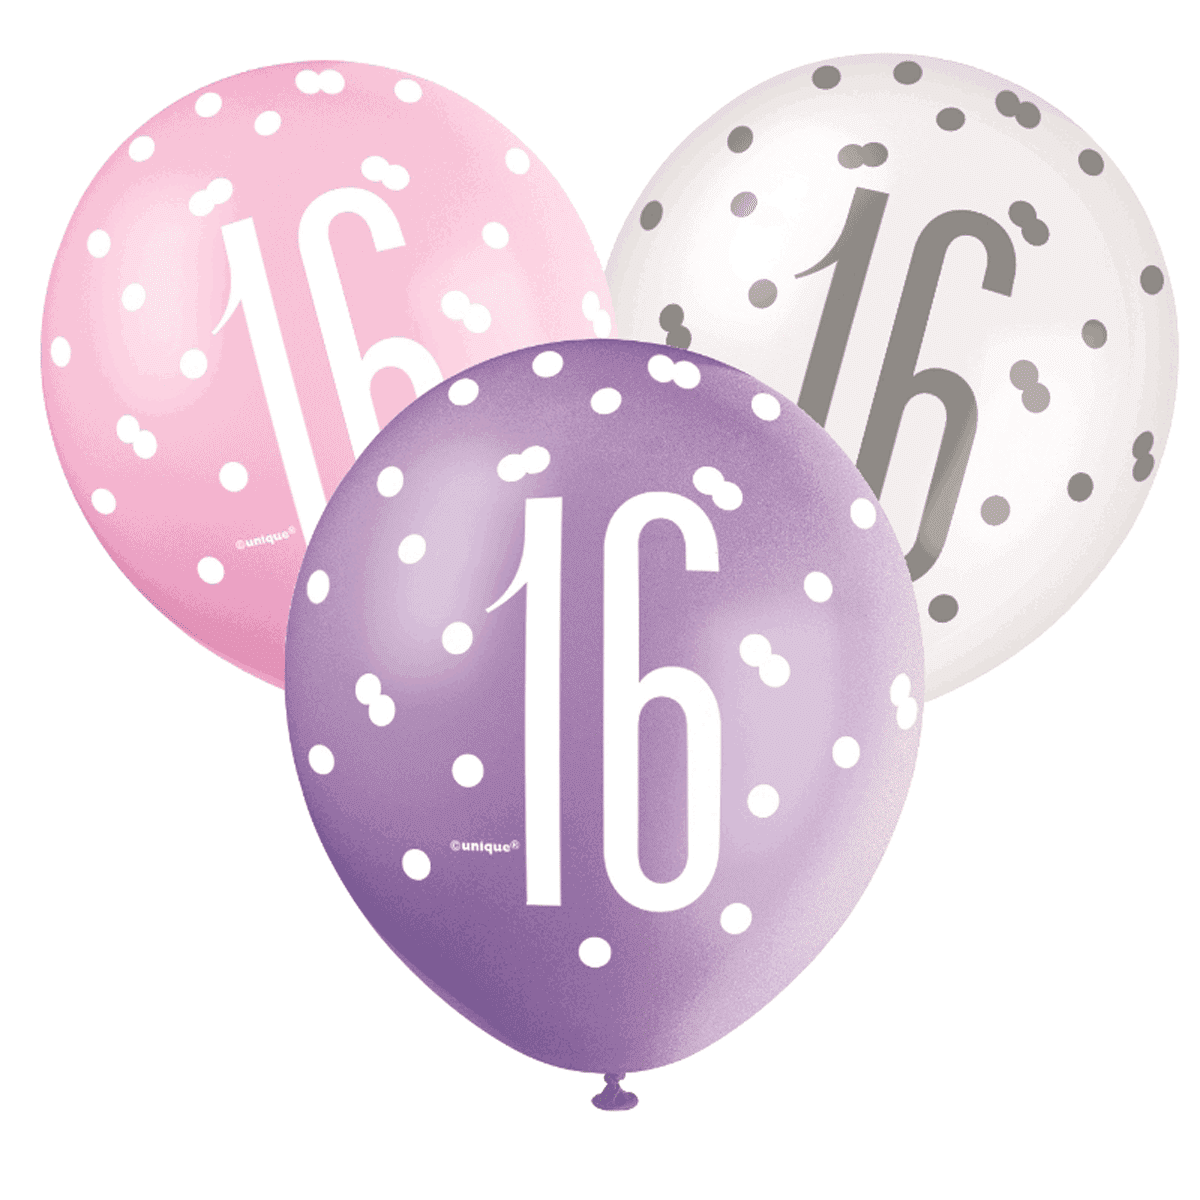 Pink, Lavender, & White Latex Balloons 16th